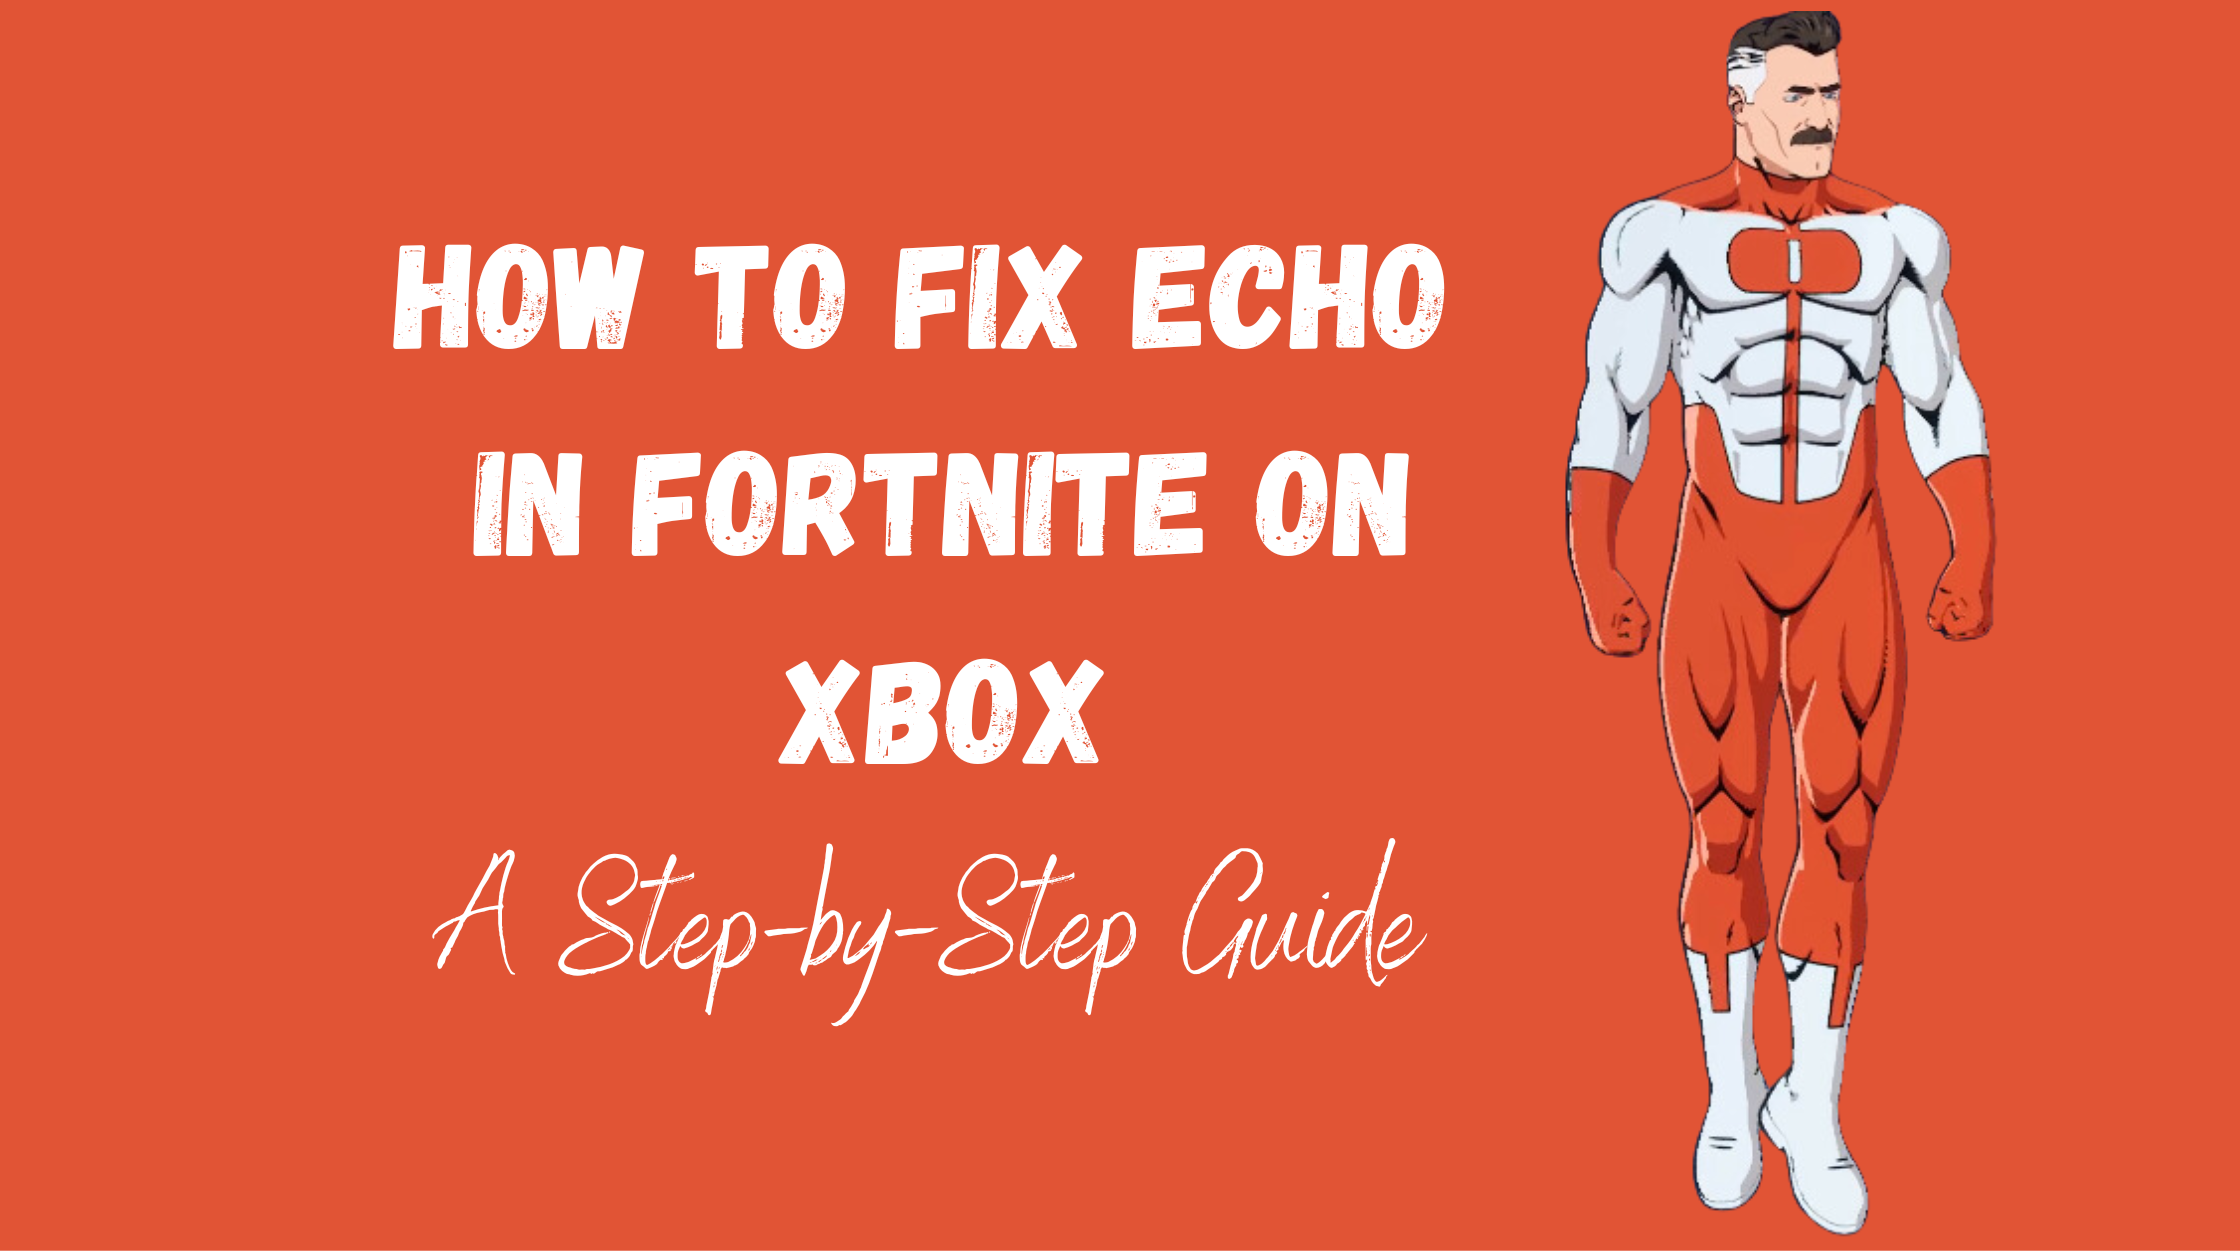 How to Fix Echo in Fortnite on Xbox